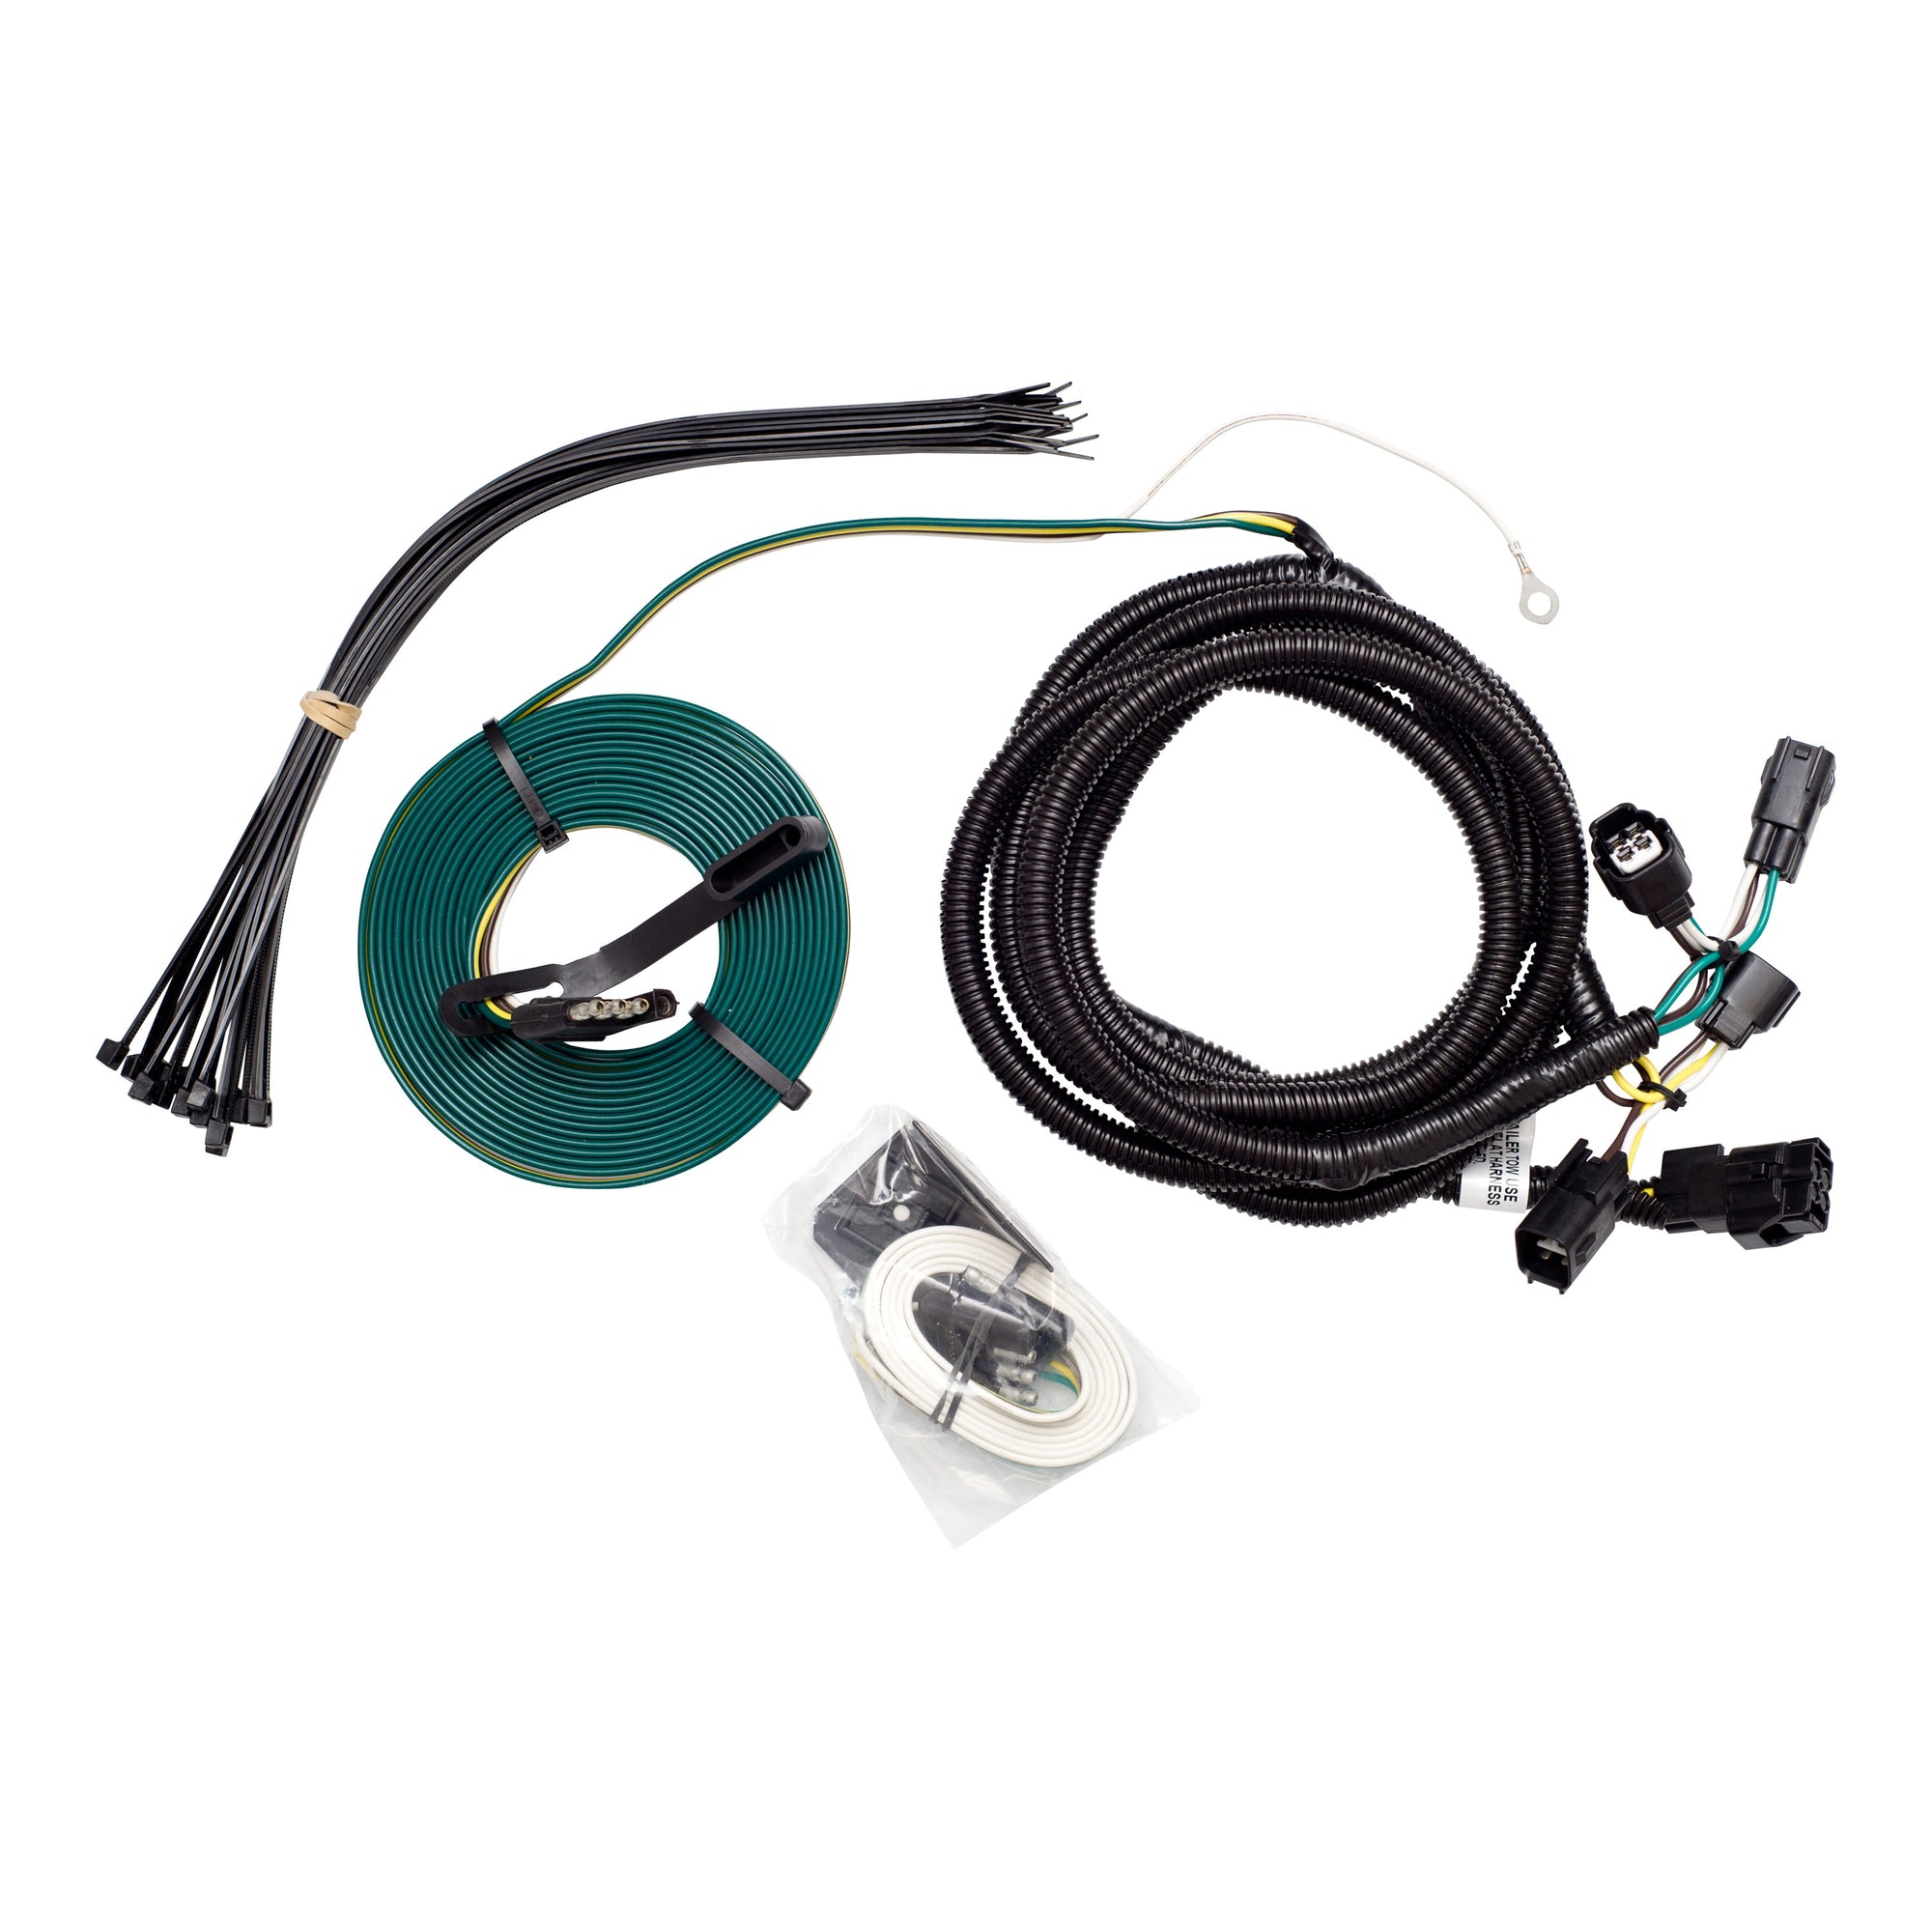 Demco 9526140 Towed Connector Vehicle Wiring Kit - 9523140